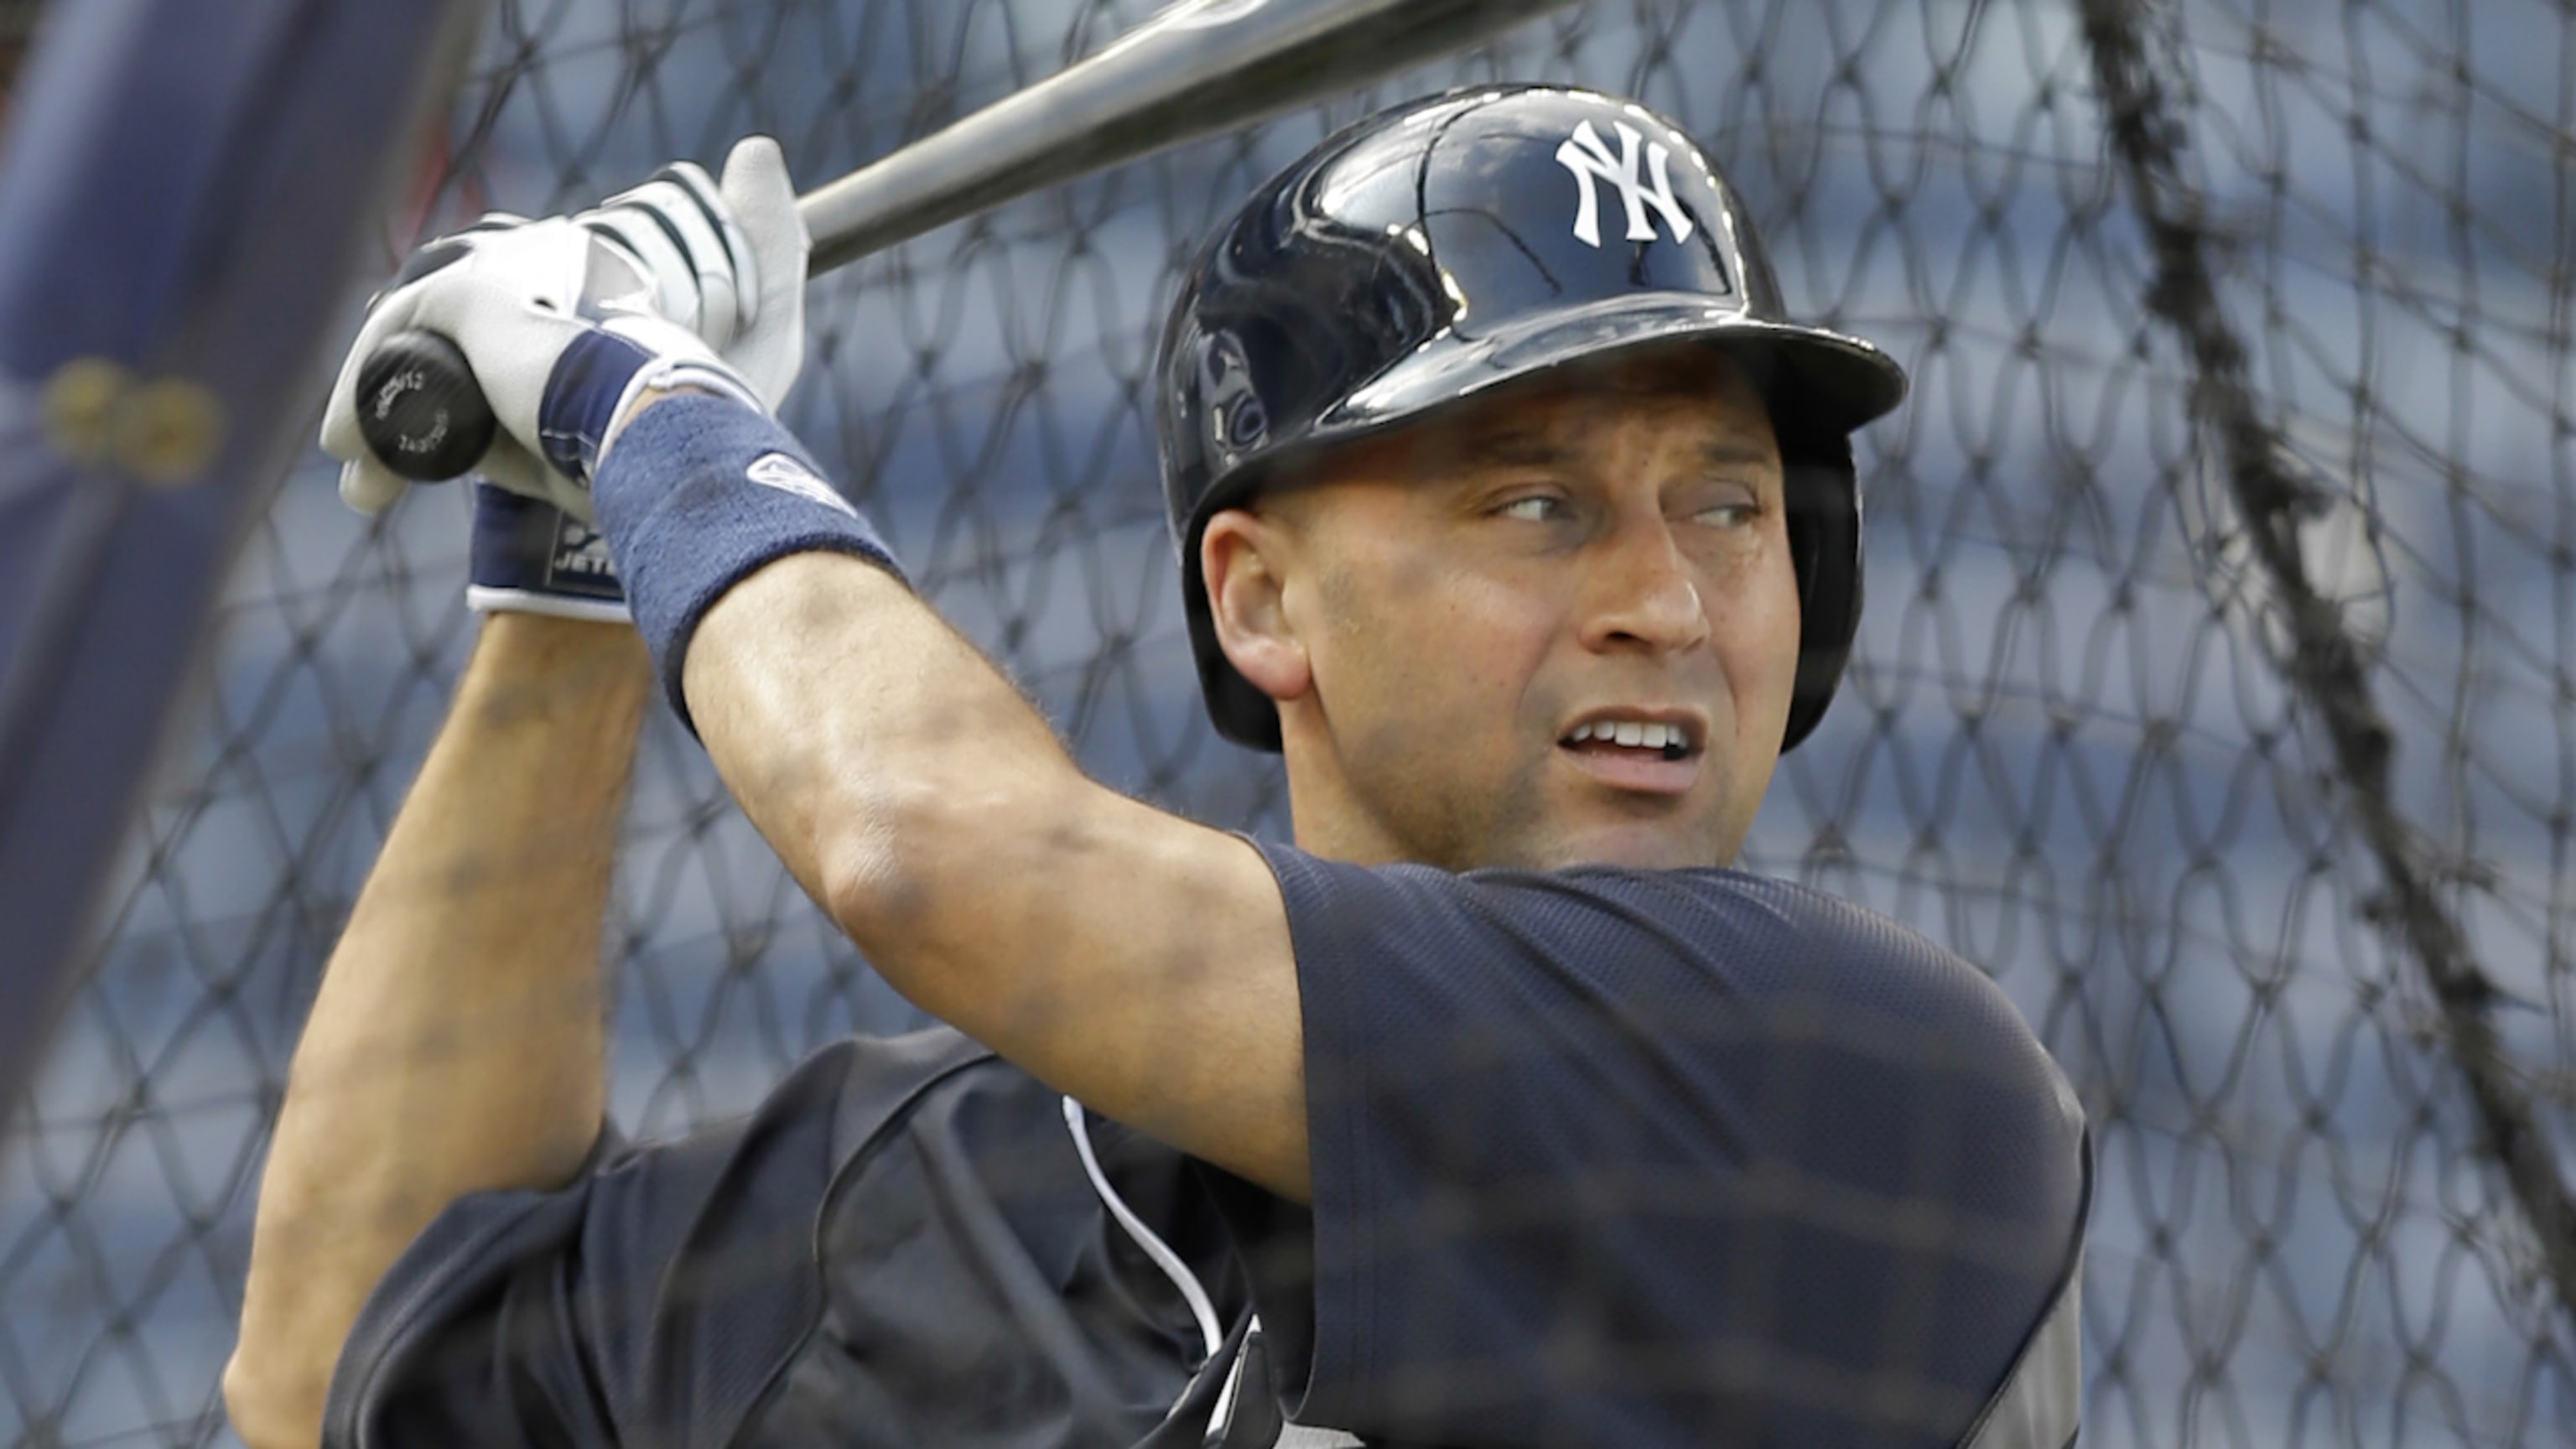 MLB - Derek Jeter highlights this year's Hall of Fame